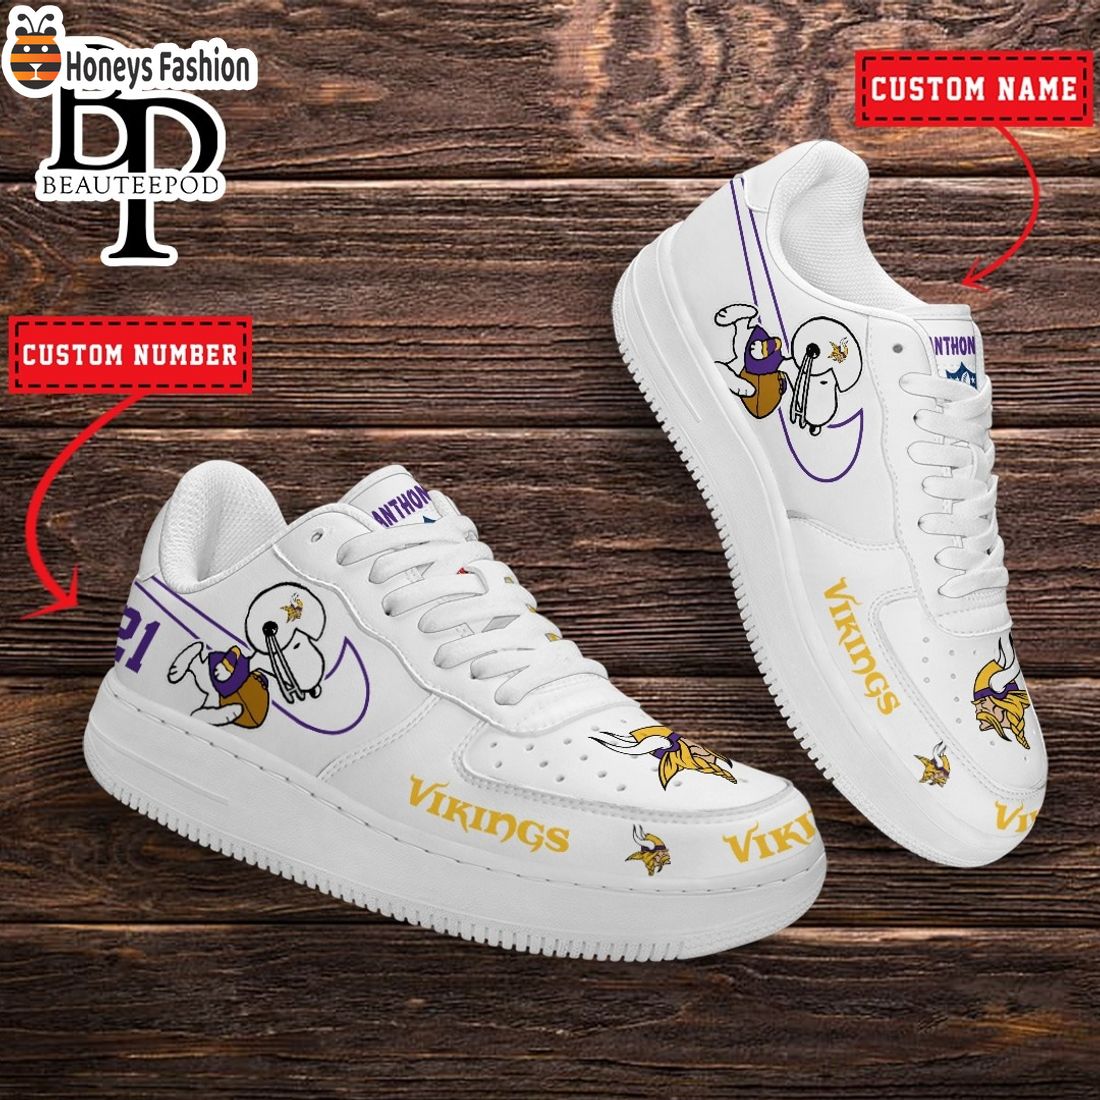 Minnesota Vikings NFL Snoopy Personalized Air Force 1 Shoes